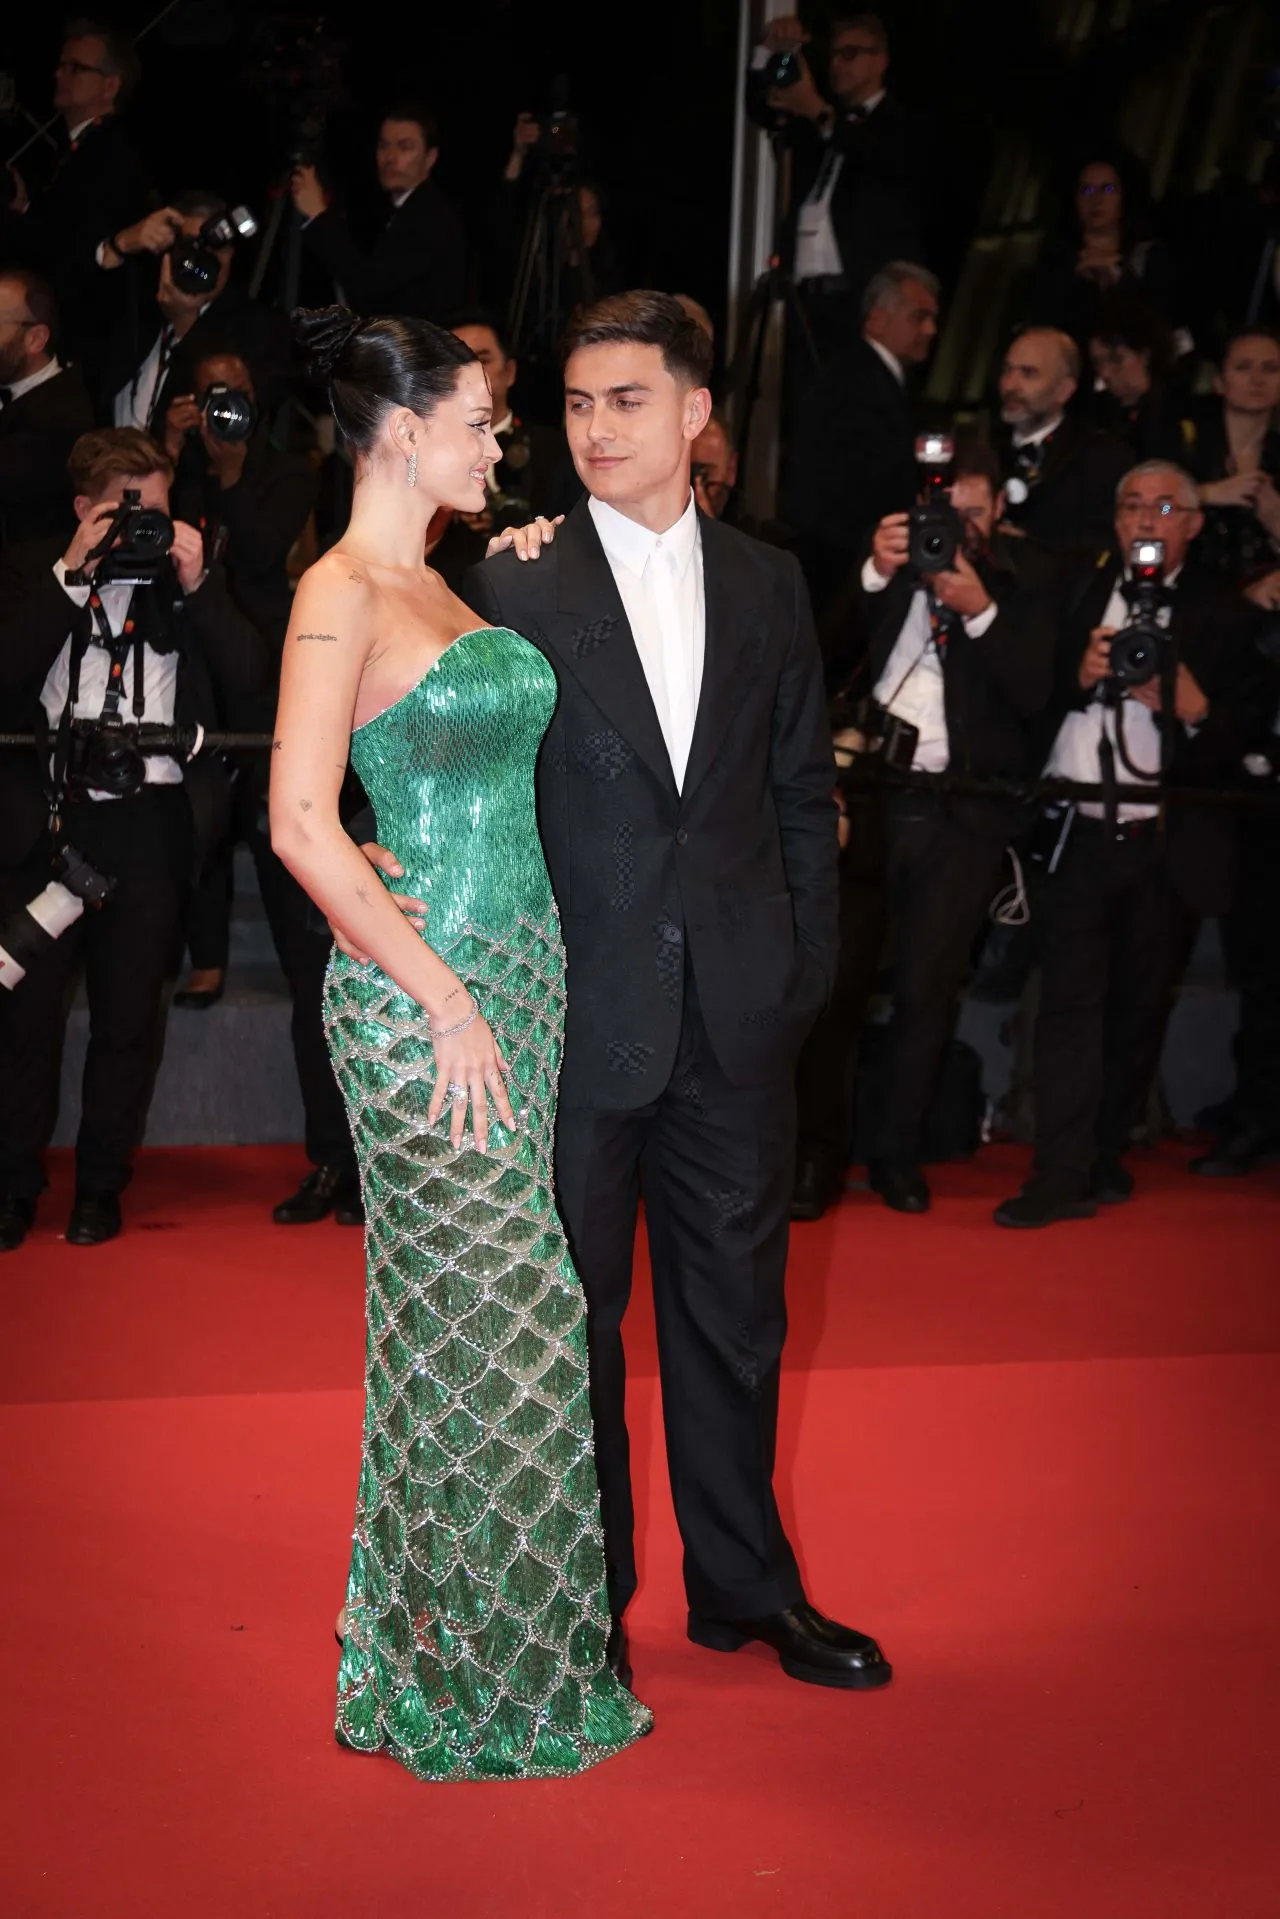 ORIANA SABATINI AT THE SHROUDS PREMIERE AT CANNES FILM FESTIVAL7